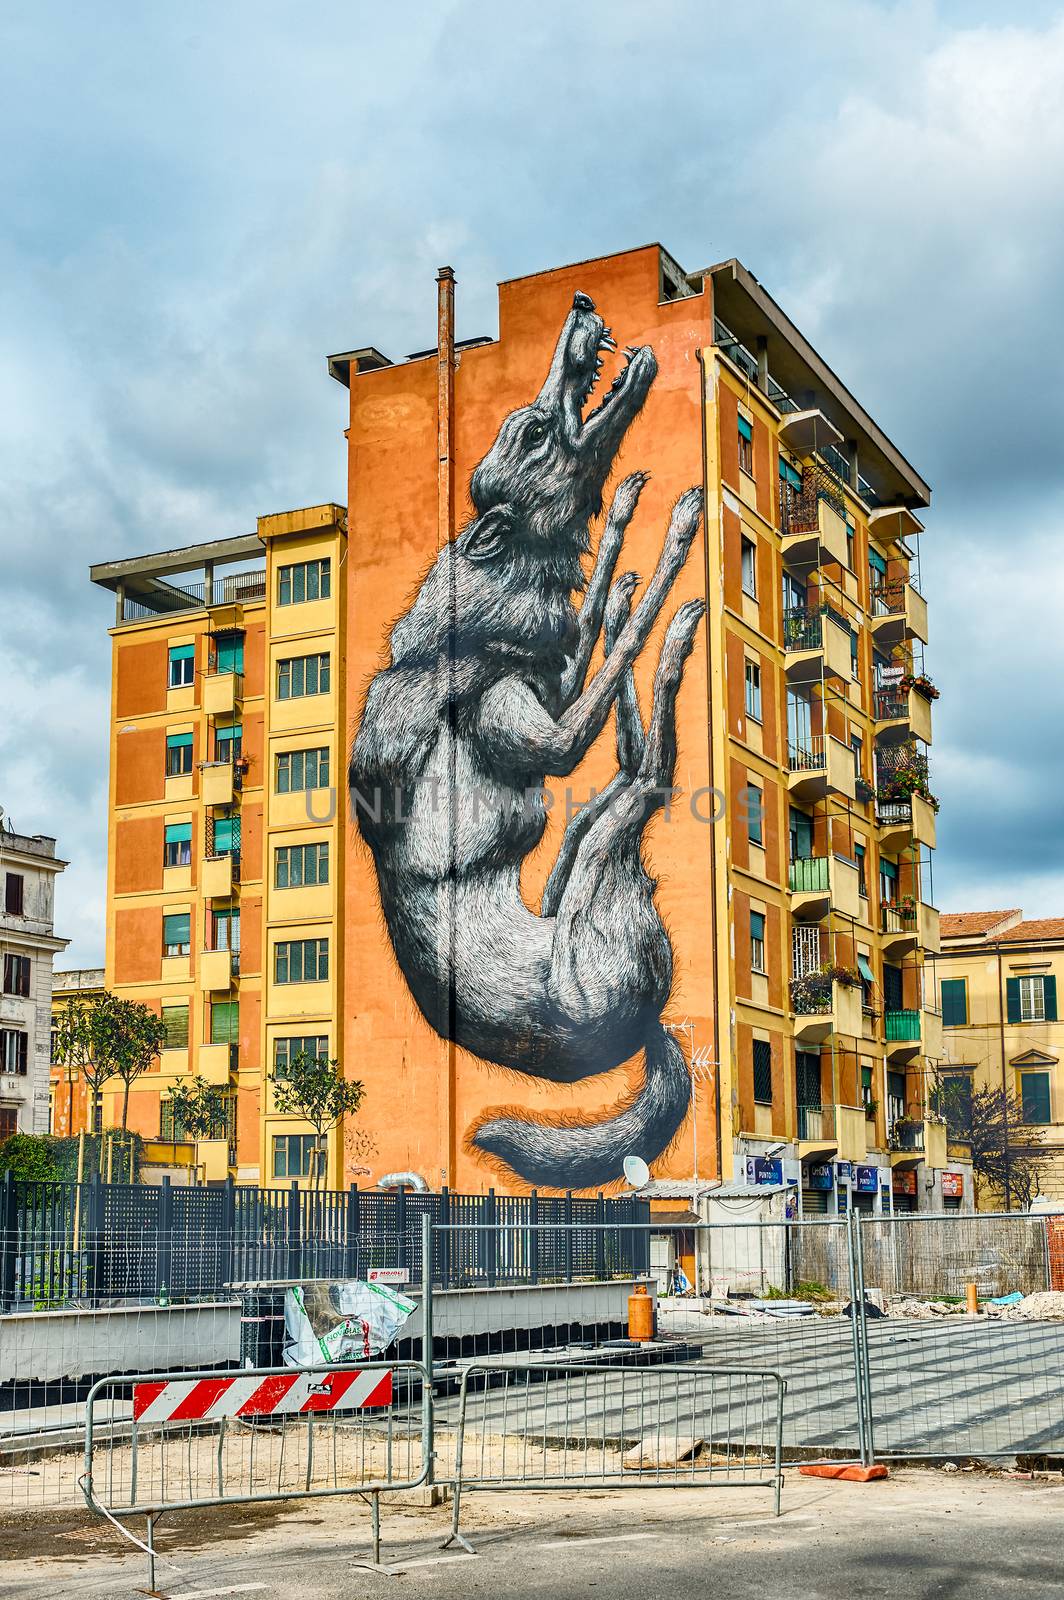 ROME - MARCH 20:  The black wolf mural graffiti painted in 2014 by the belgian artist Roa in the Testaccio district in Rome, as seen on March 20, 2016.